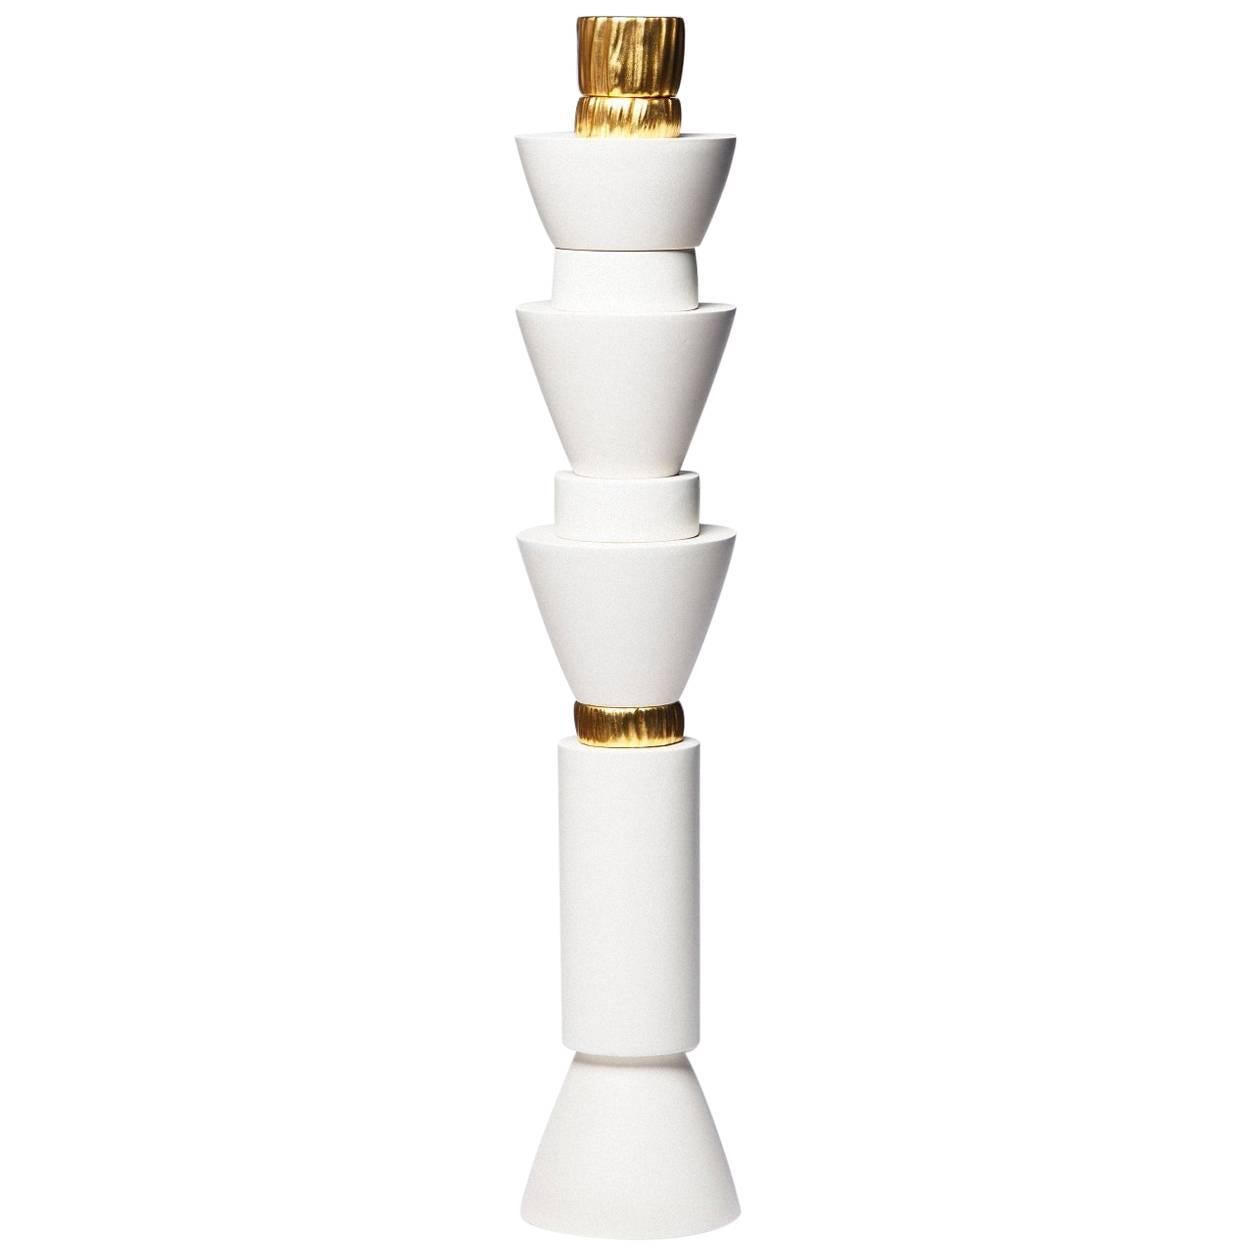 "Brama Totem" Ltd. Ed. White Glazed and Gold Leaf, Sculpture by P. Girardin For Sale